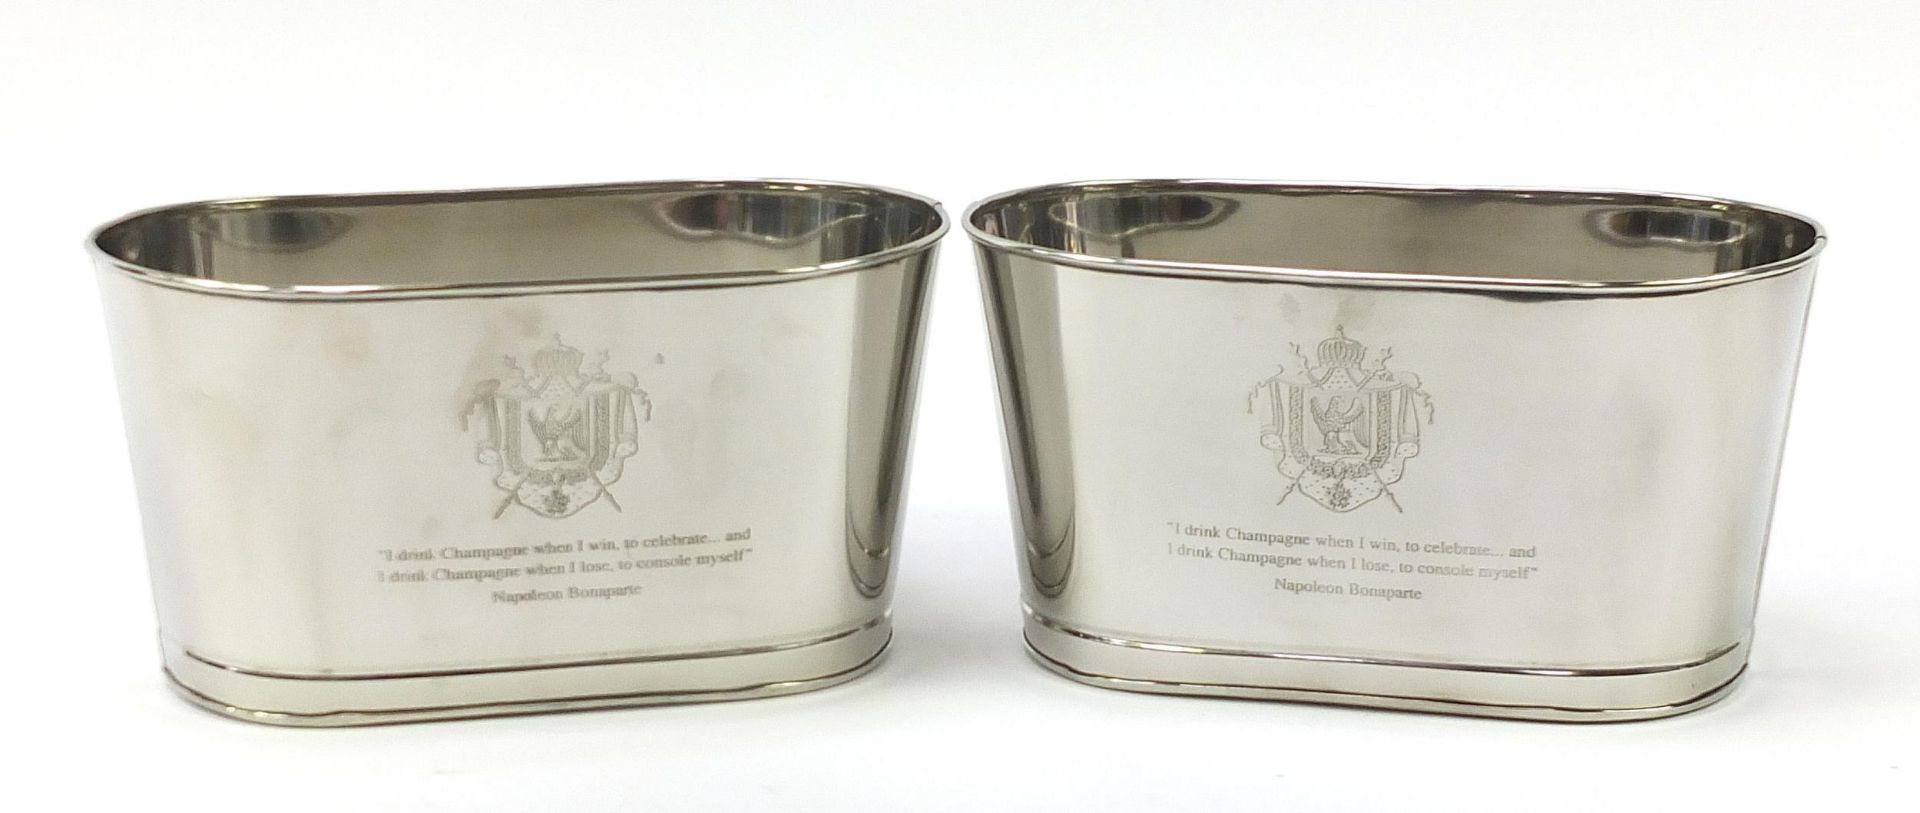 Pair of silver plated ice buckets with Napoleon Bonaparte and Lily Bollinger mottos, 18cm H x 35cm W